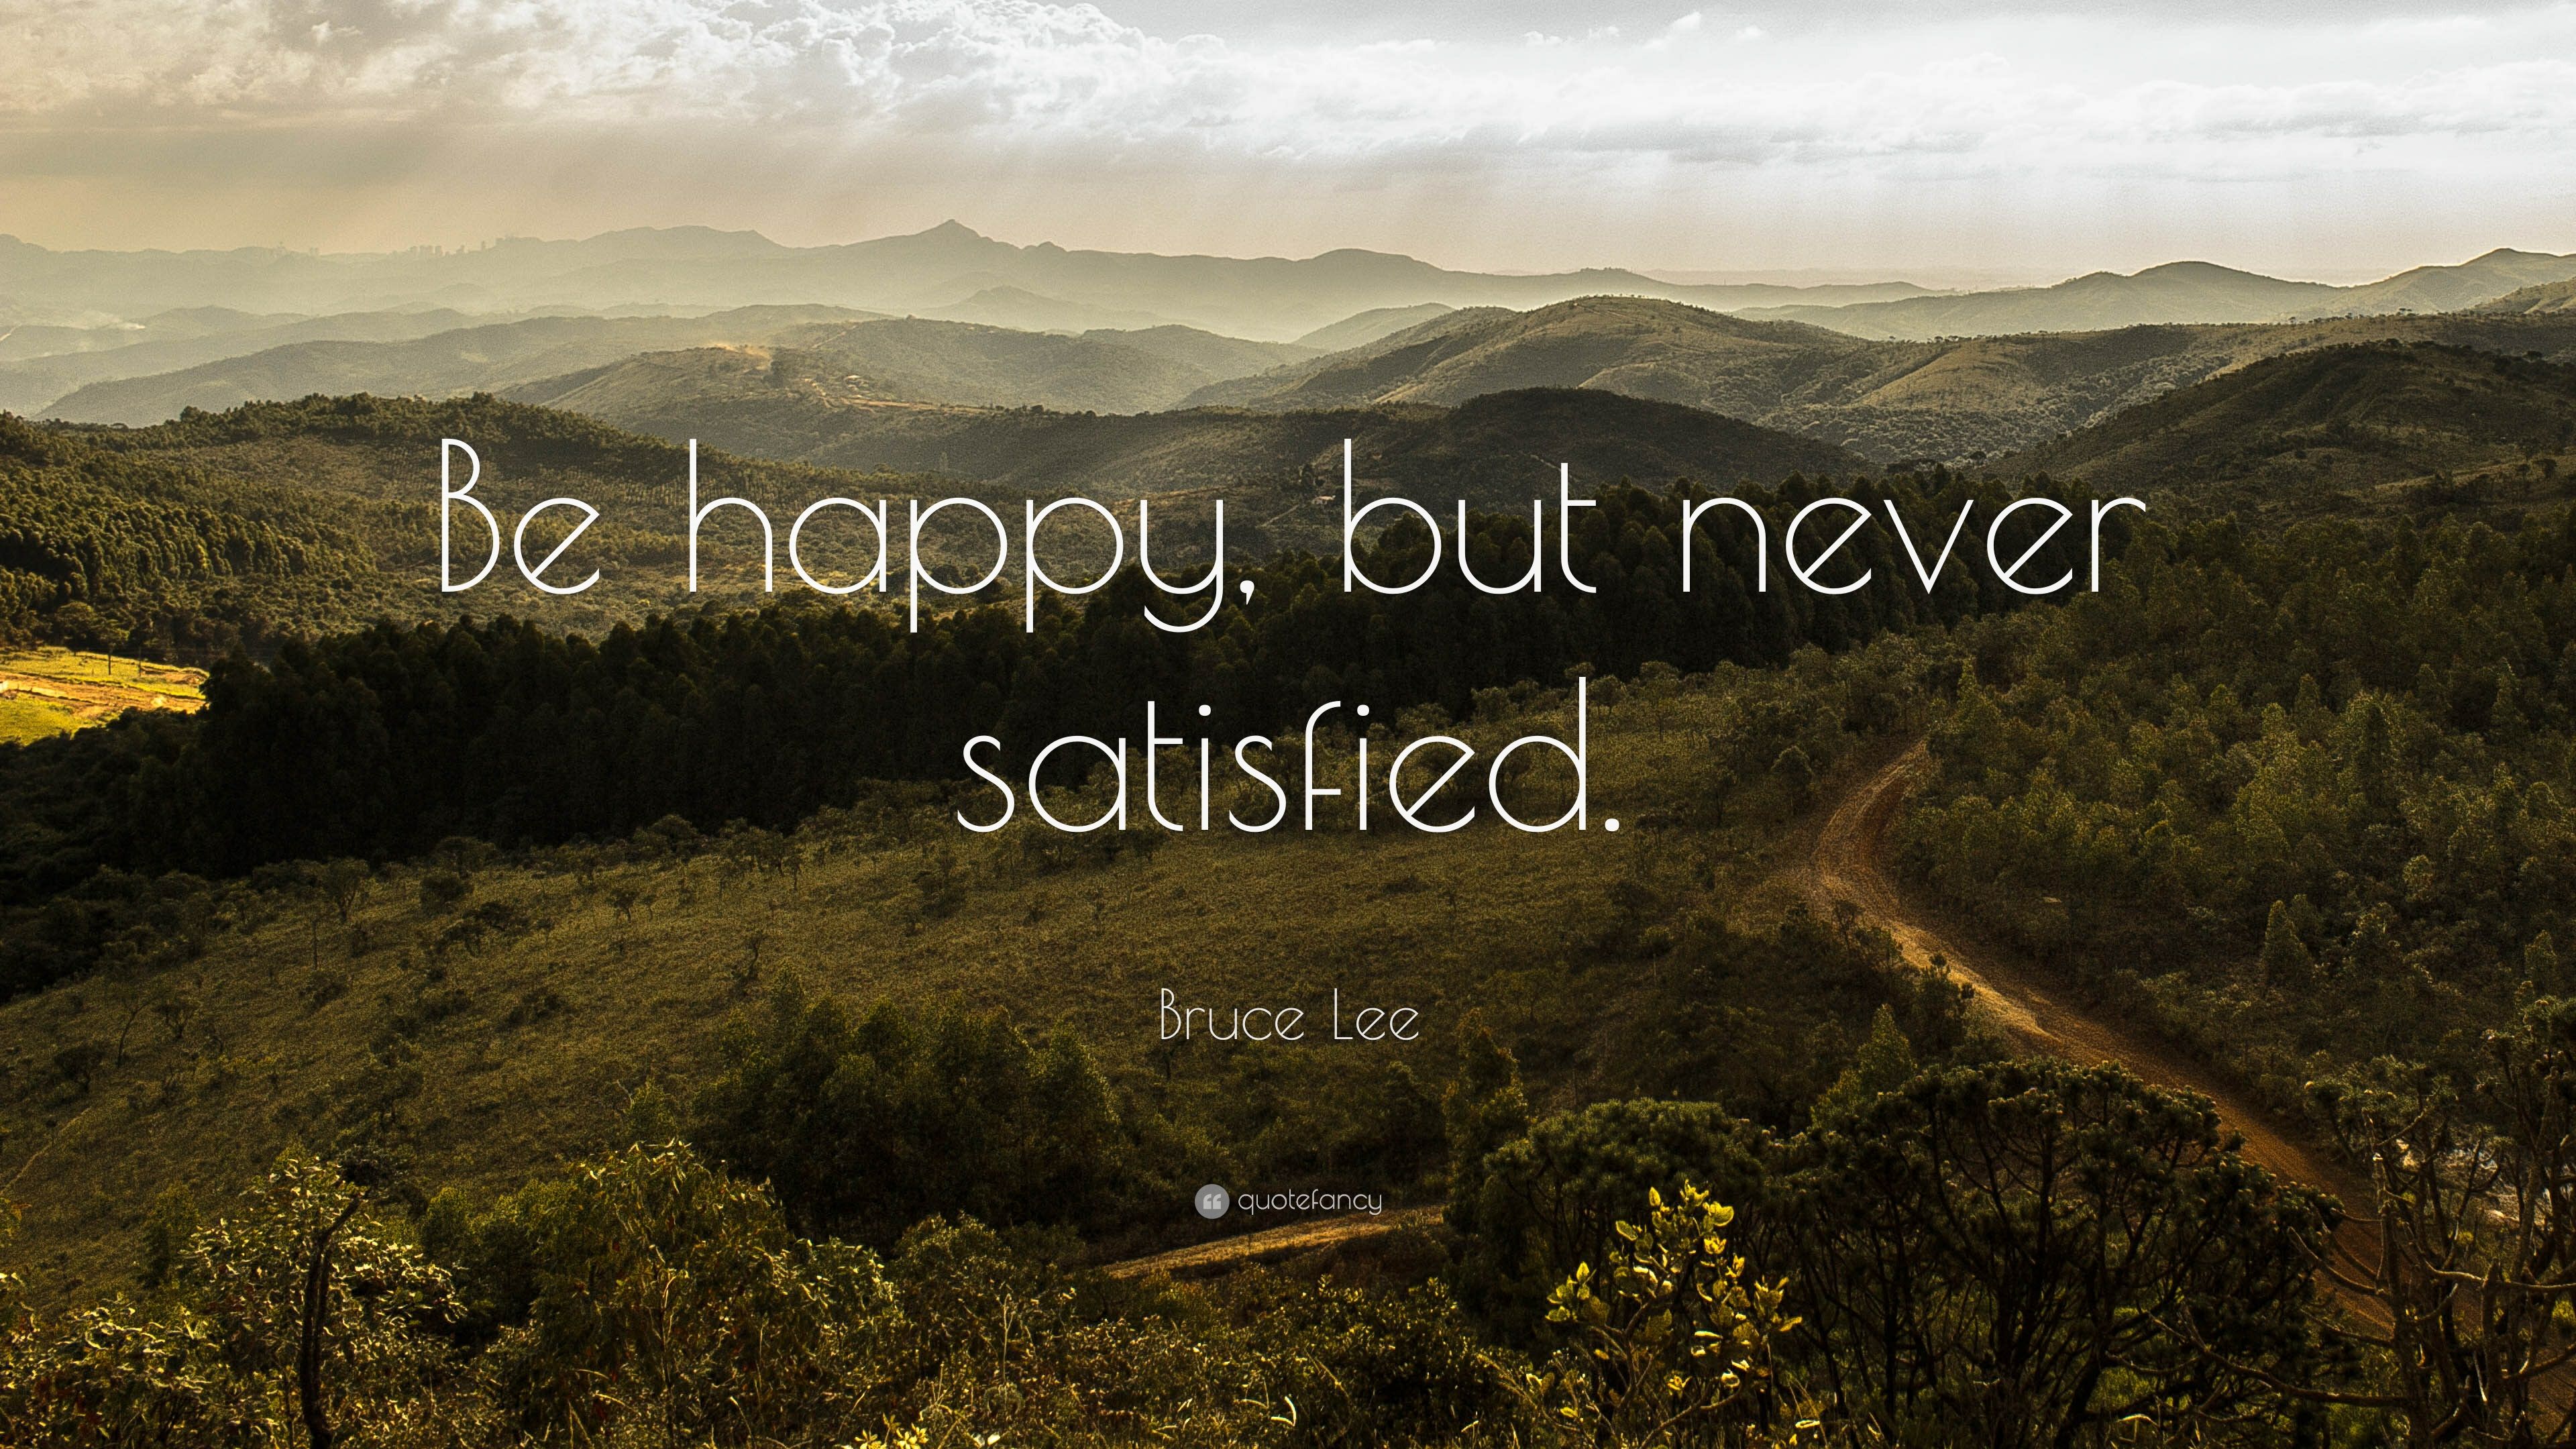 Bruce Lee Quote: “Be happy, but never satisfied.” (22 wallpaper)